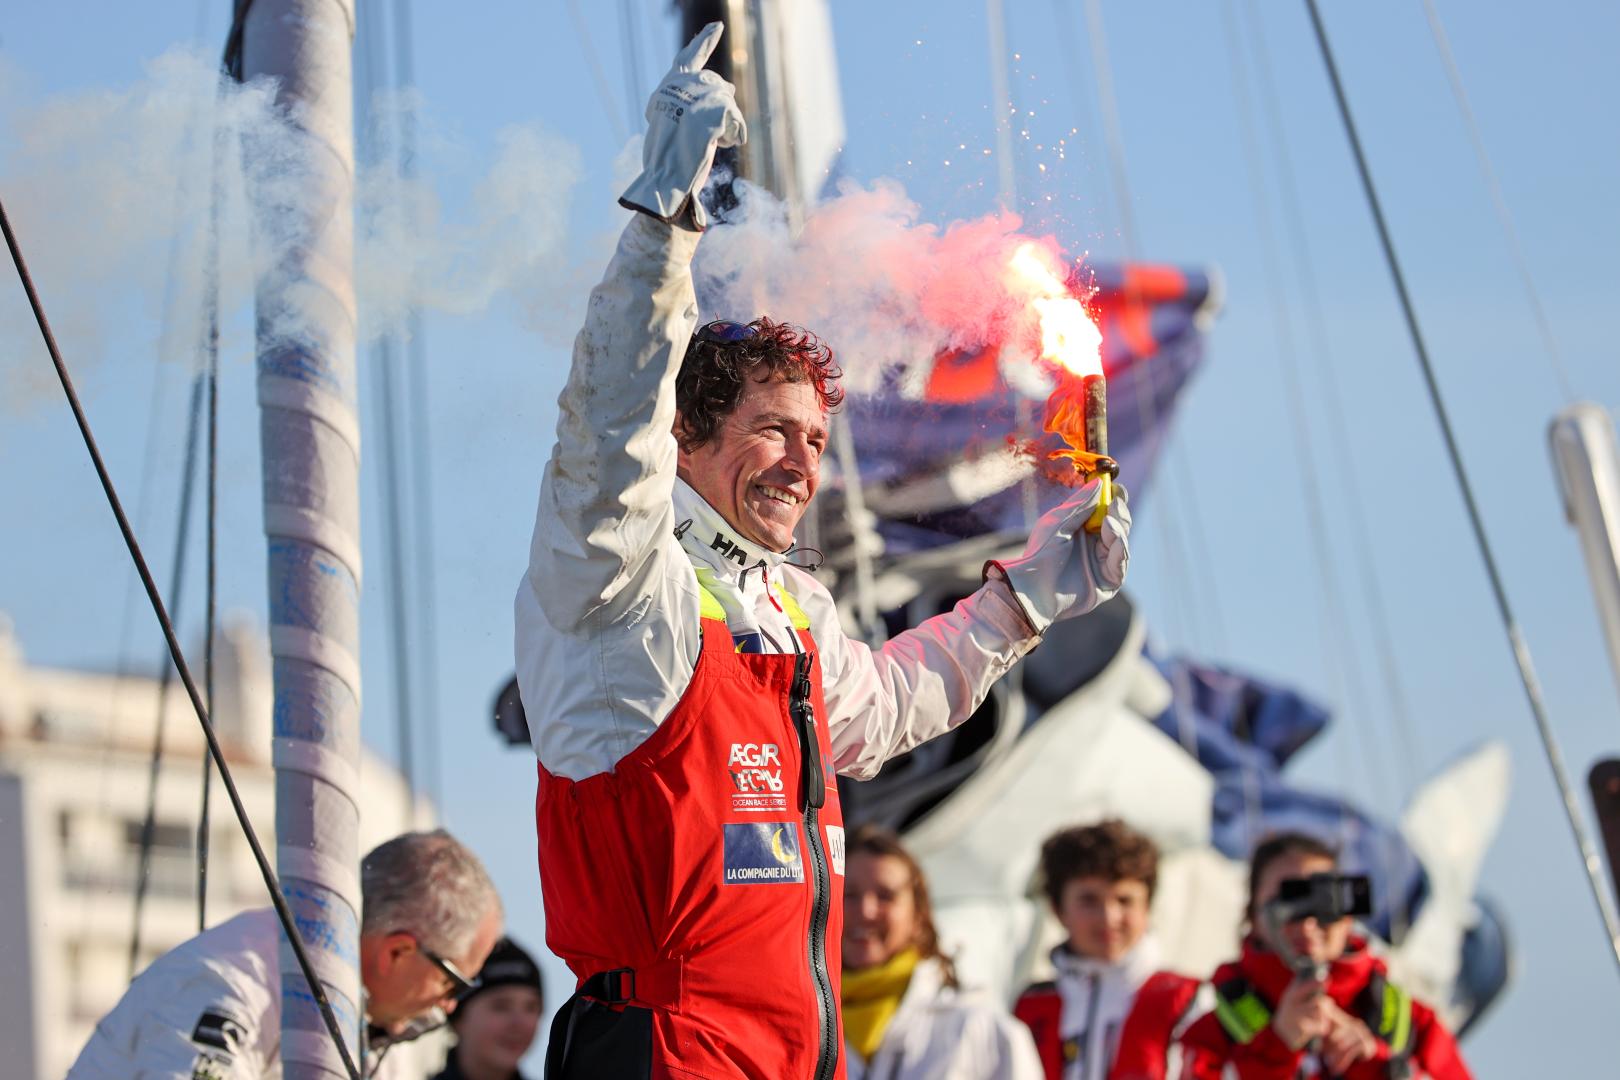 Britain’s Merron on course for Vendée Globe 22nd Clément Giraud takes 21st